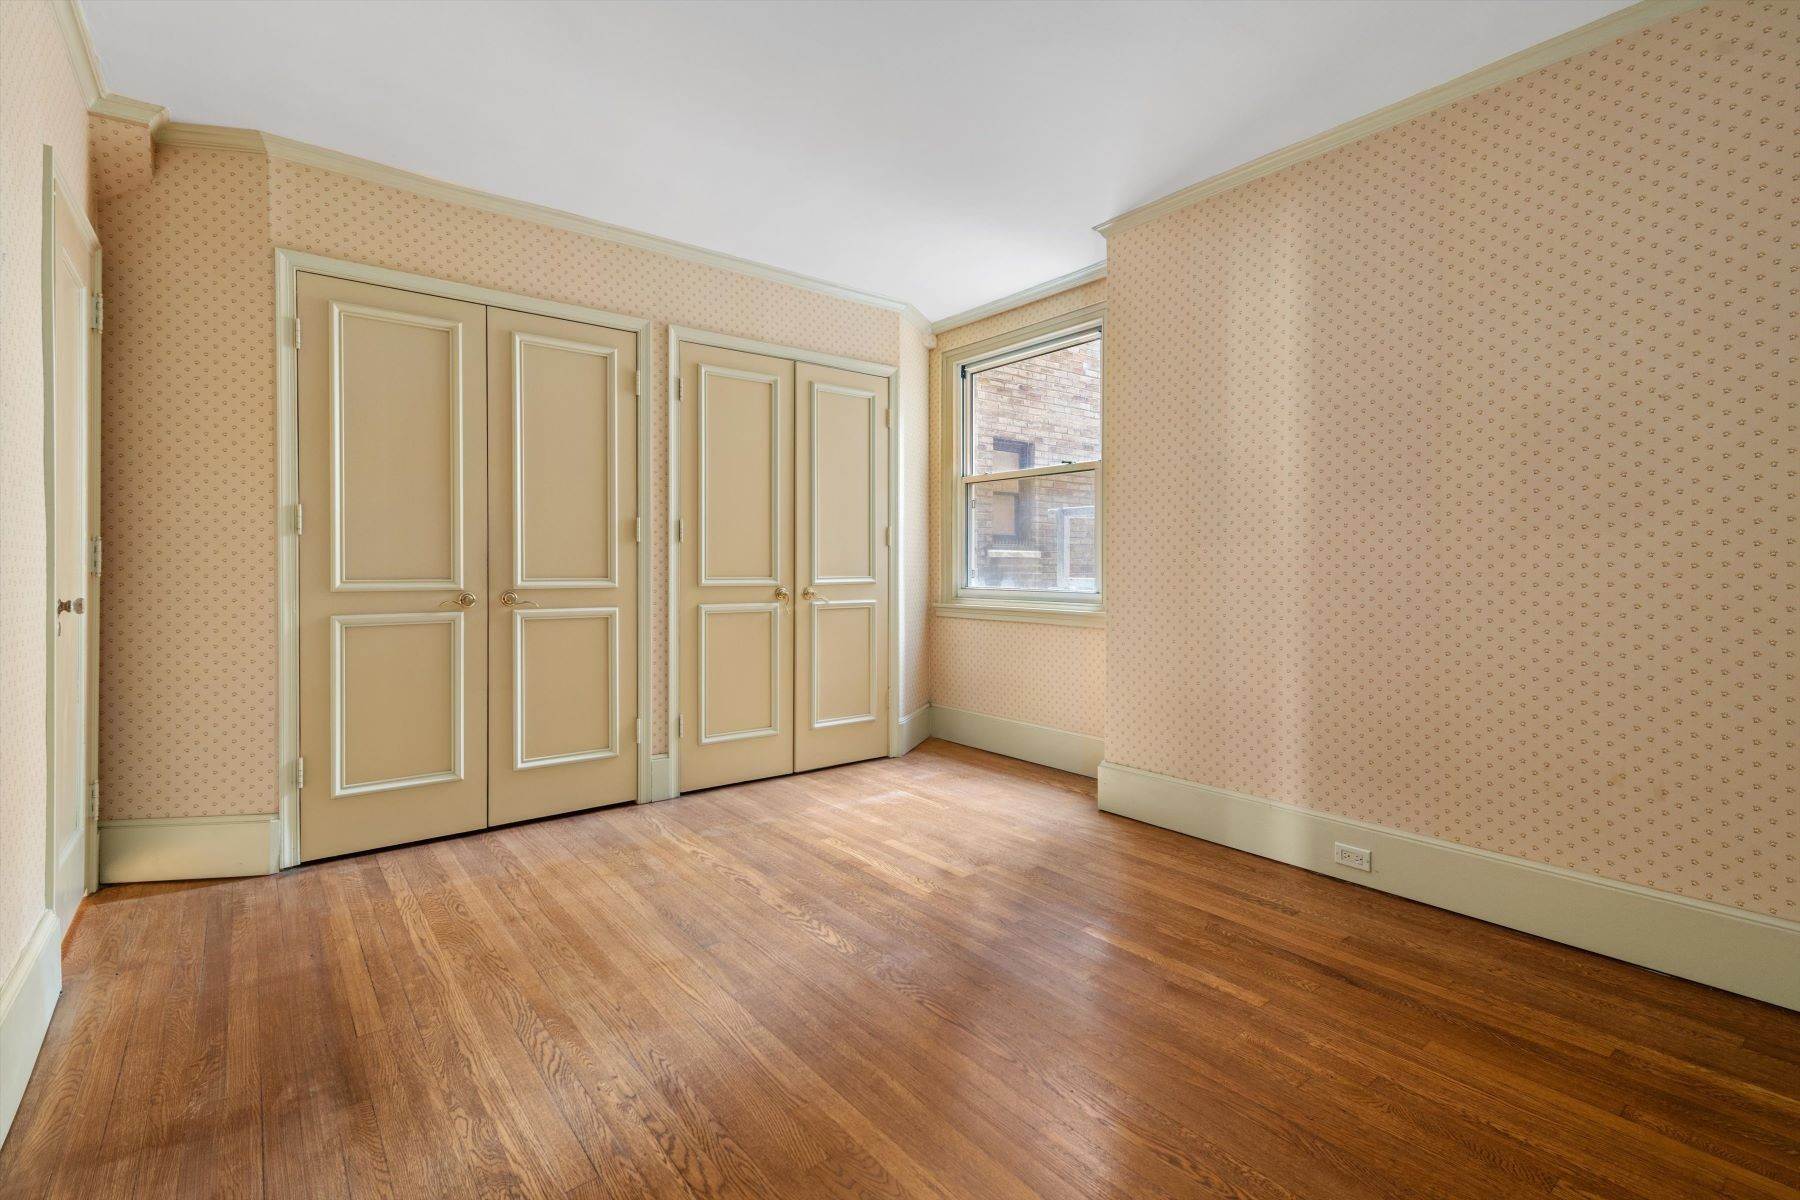 18. Apartments for Sale at 1901 Walnut Street, Philadelphia, PA 19103 1901 Walnut Street, Unit 2A Philadelphia, Pennsylvania 19103 United States